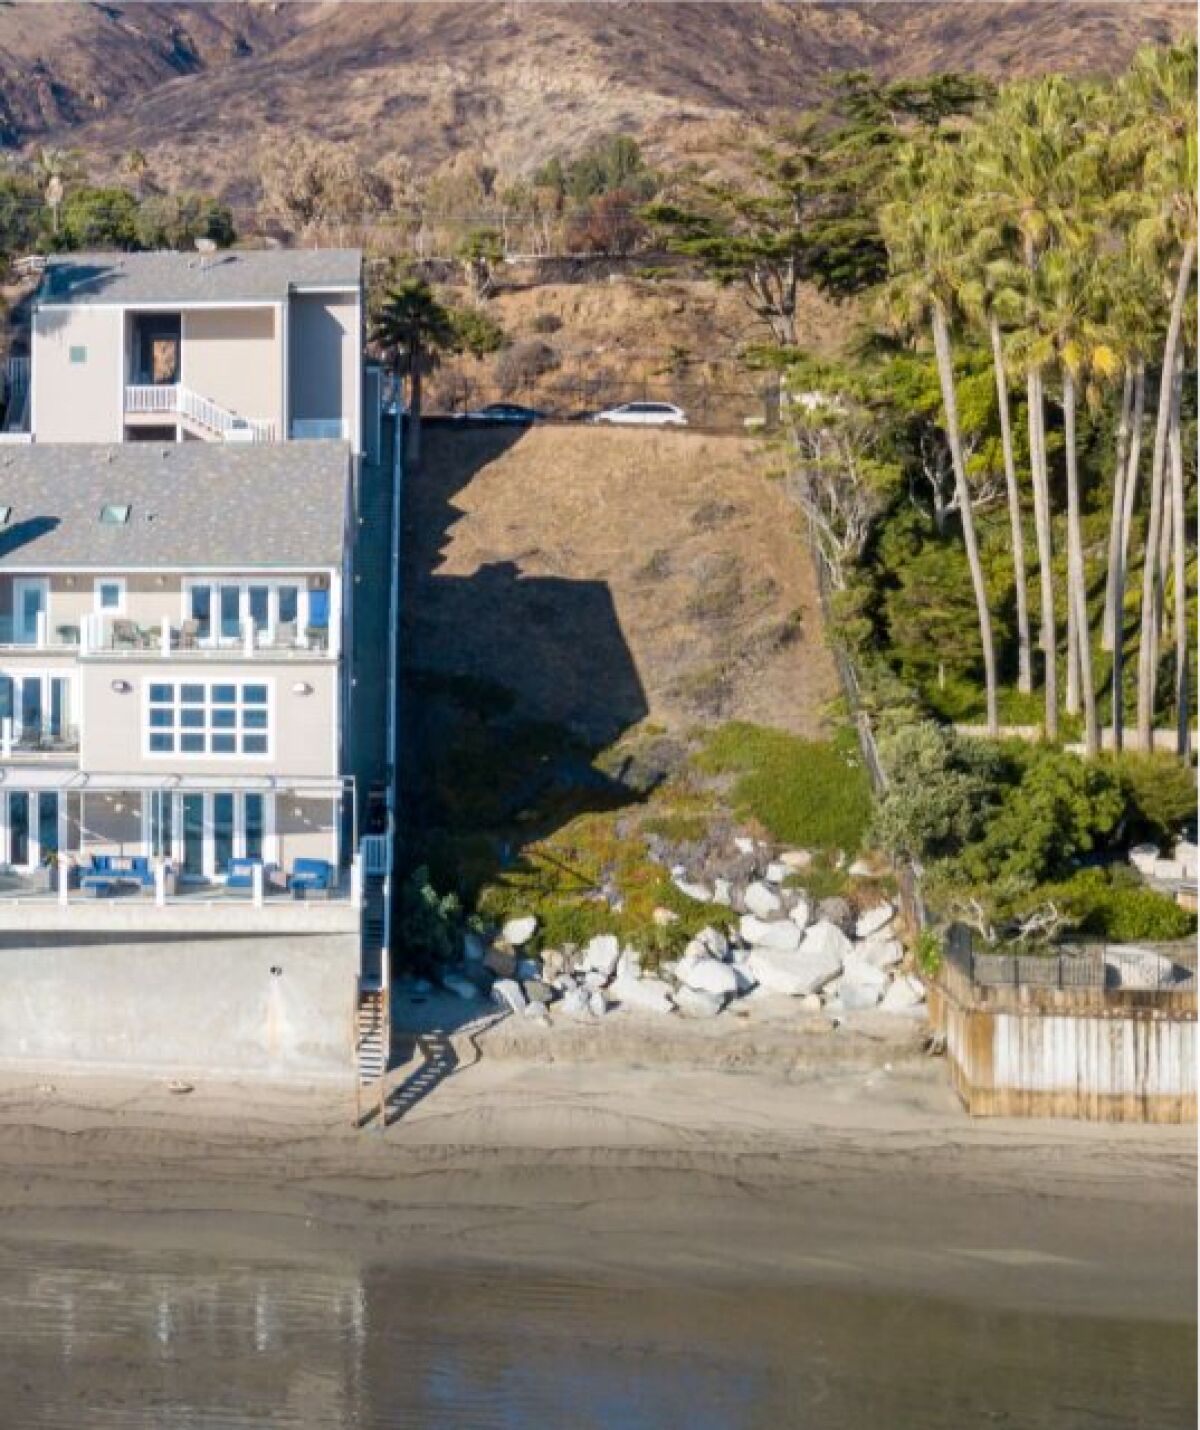 Mark Attanasio bought this Malibu parcel for $6.6 million in 2017 but hasn't developed it.